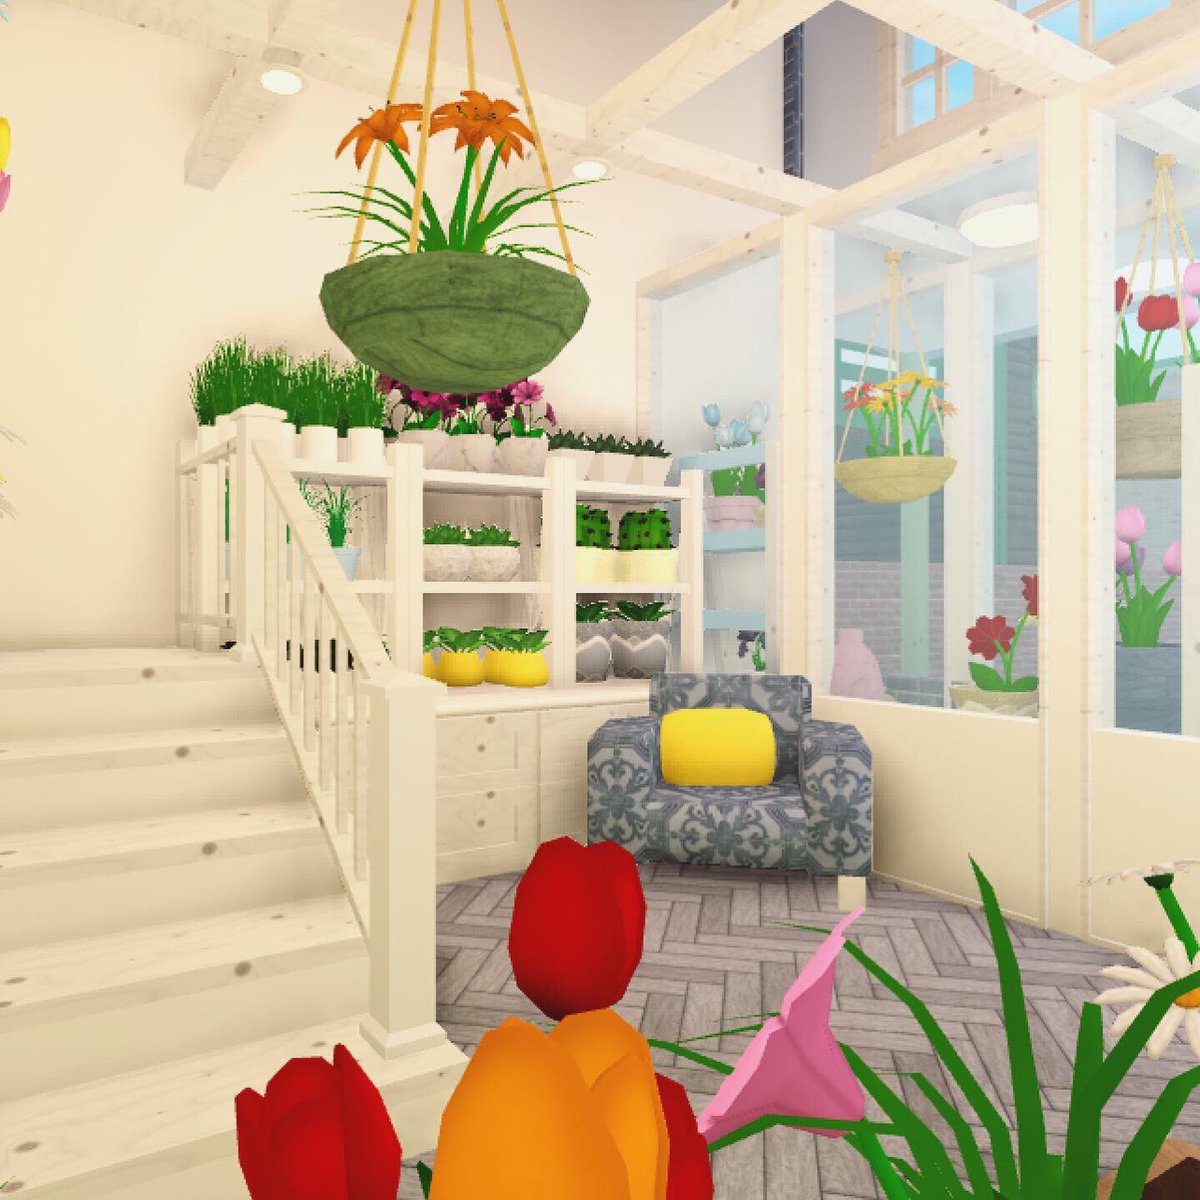 Spookles On Twitter I Added A Garden Shop To My Town Yesterday And It Turned Out Super Cute Check Out The Video For It Https T Co Cyd8hwuy79 Roblox Bloxburg Https T Co Qw5rtexgil